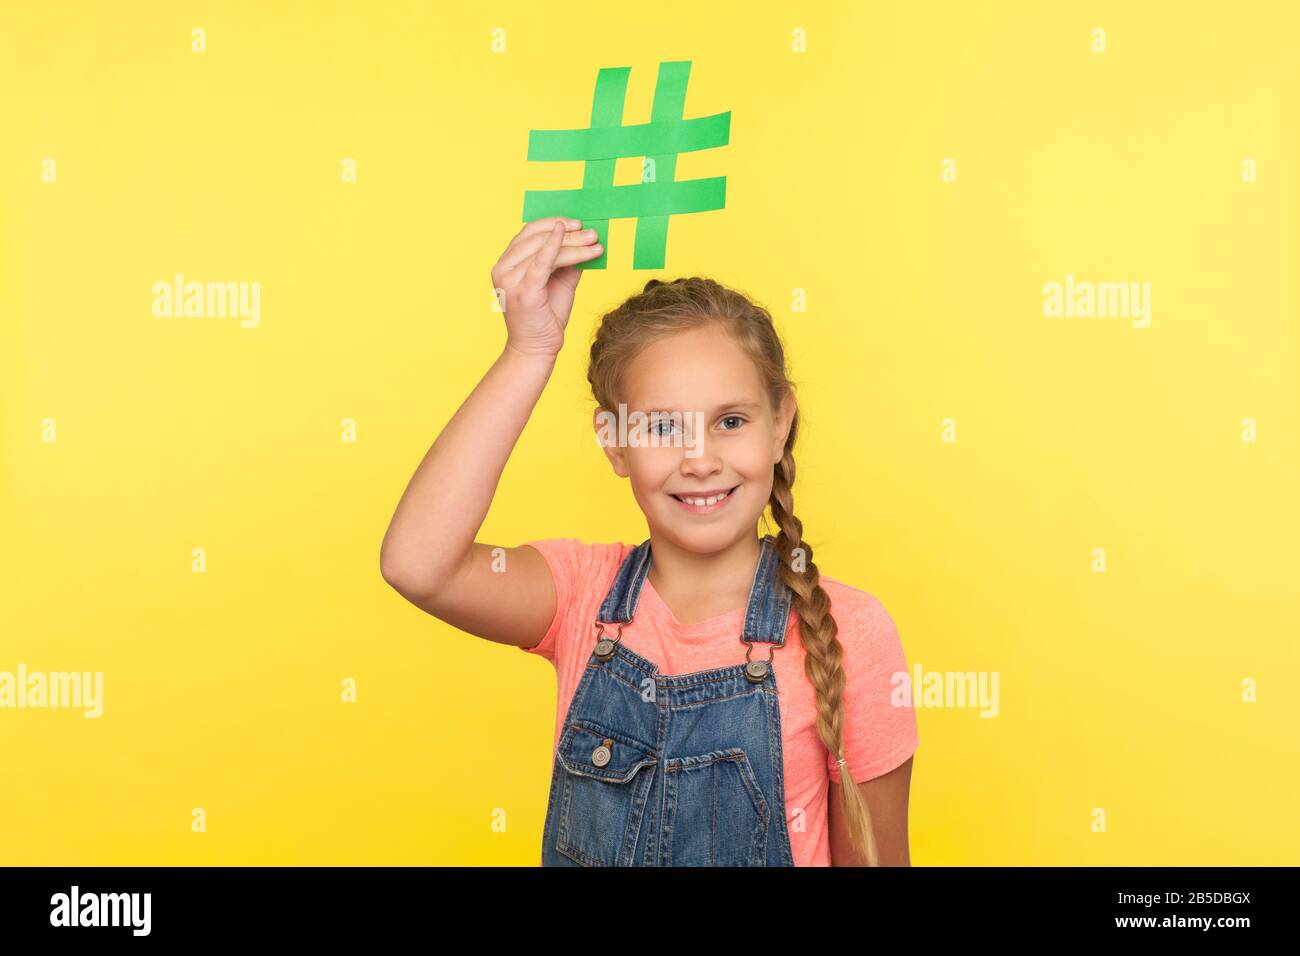 Viral web content, internet forum. Portrait of happy little girl with braid in denim overalls holding hashtag symbol over head and smiling, advertisin Stock Photo